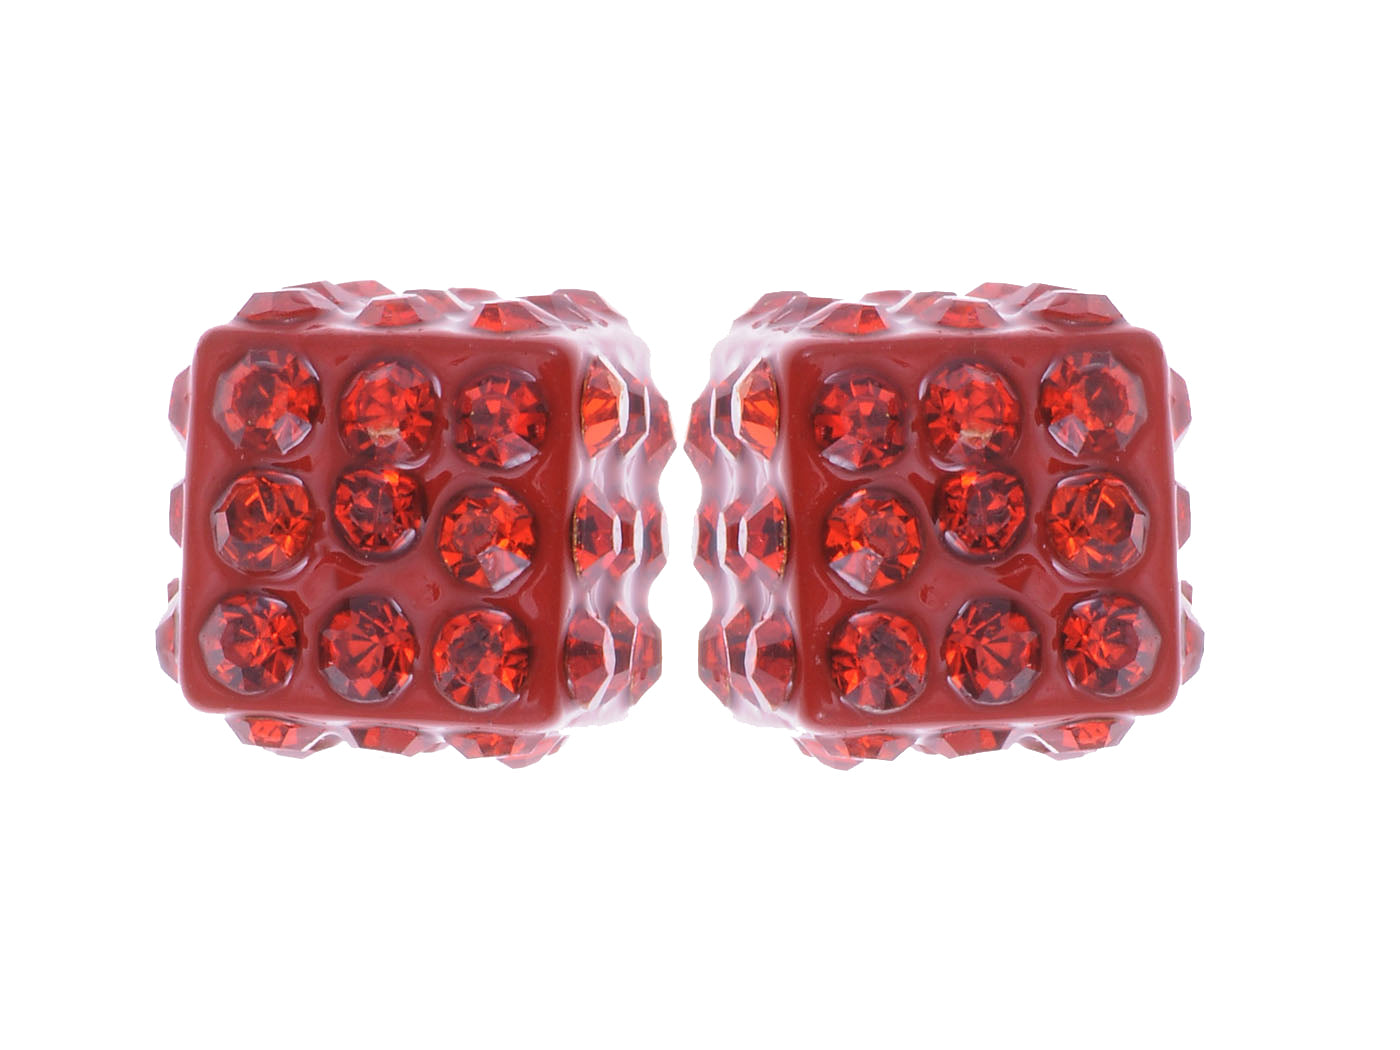 Dice Cube Box Shape Fire Siam Red Hot Flaming Earrings